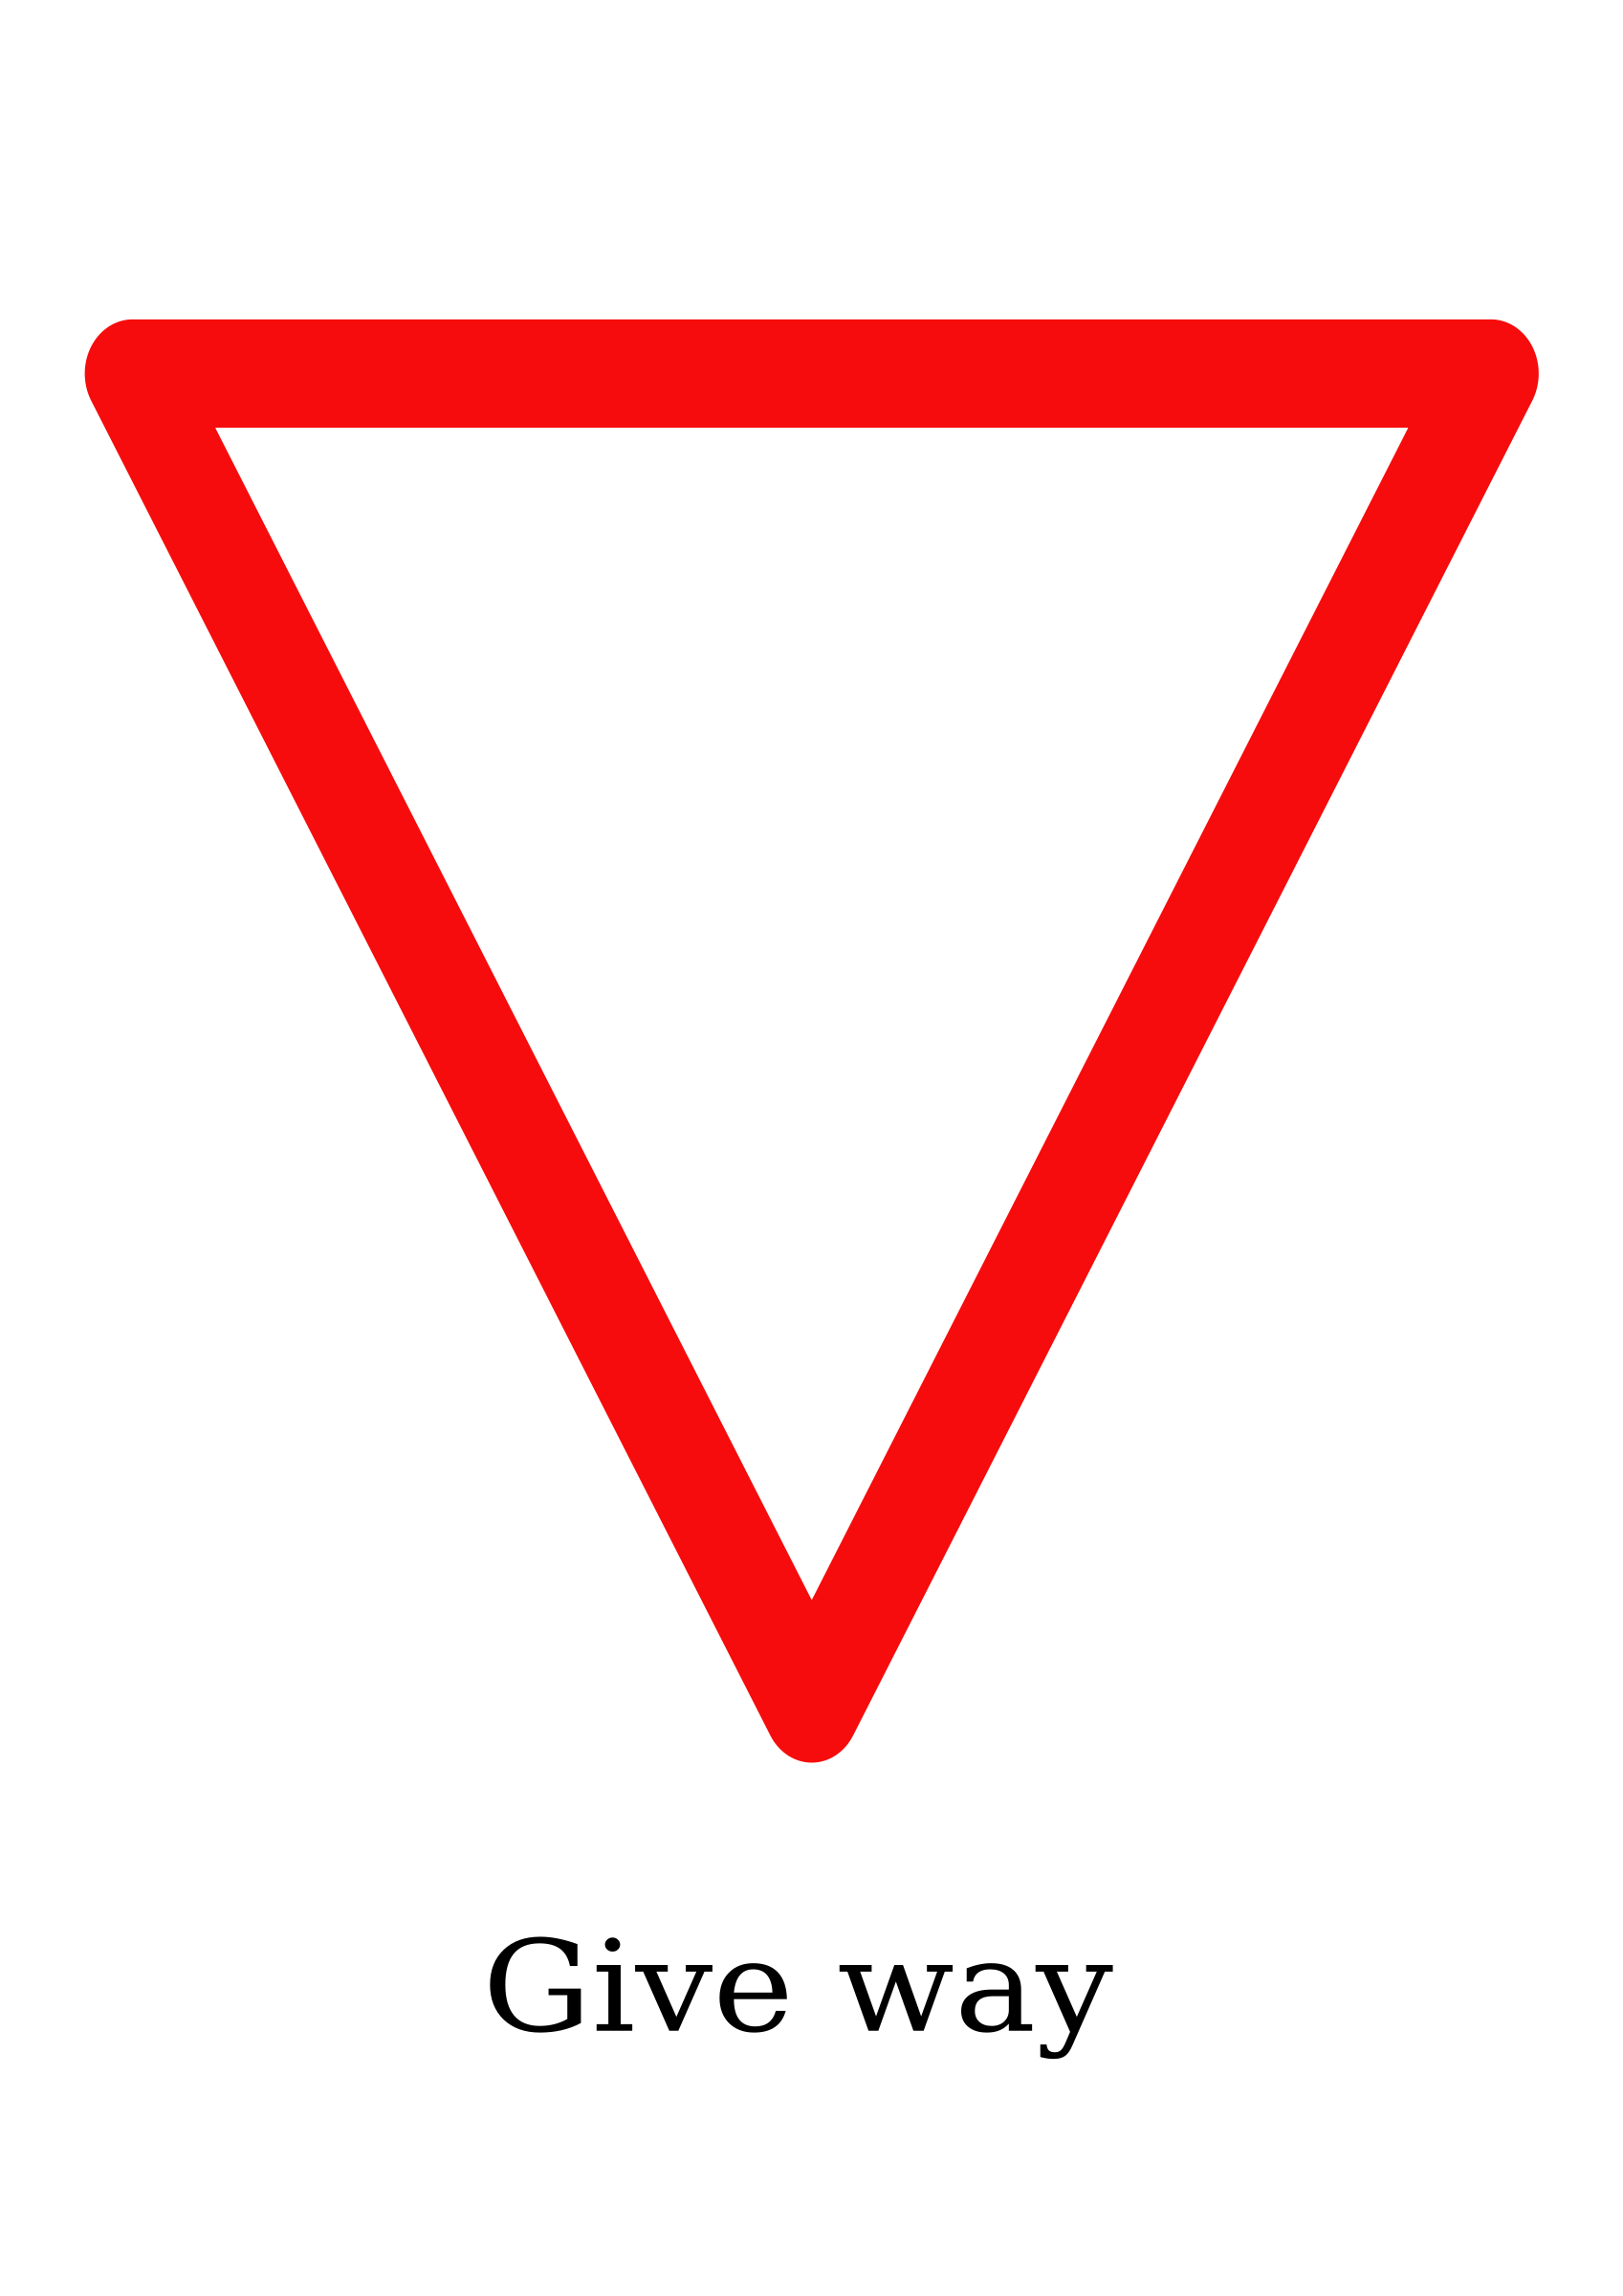 Indian road sign - Give way PNG icon